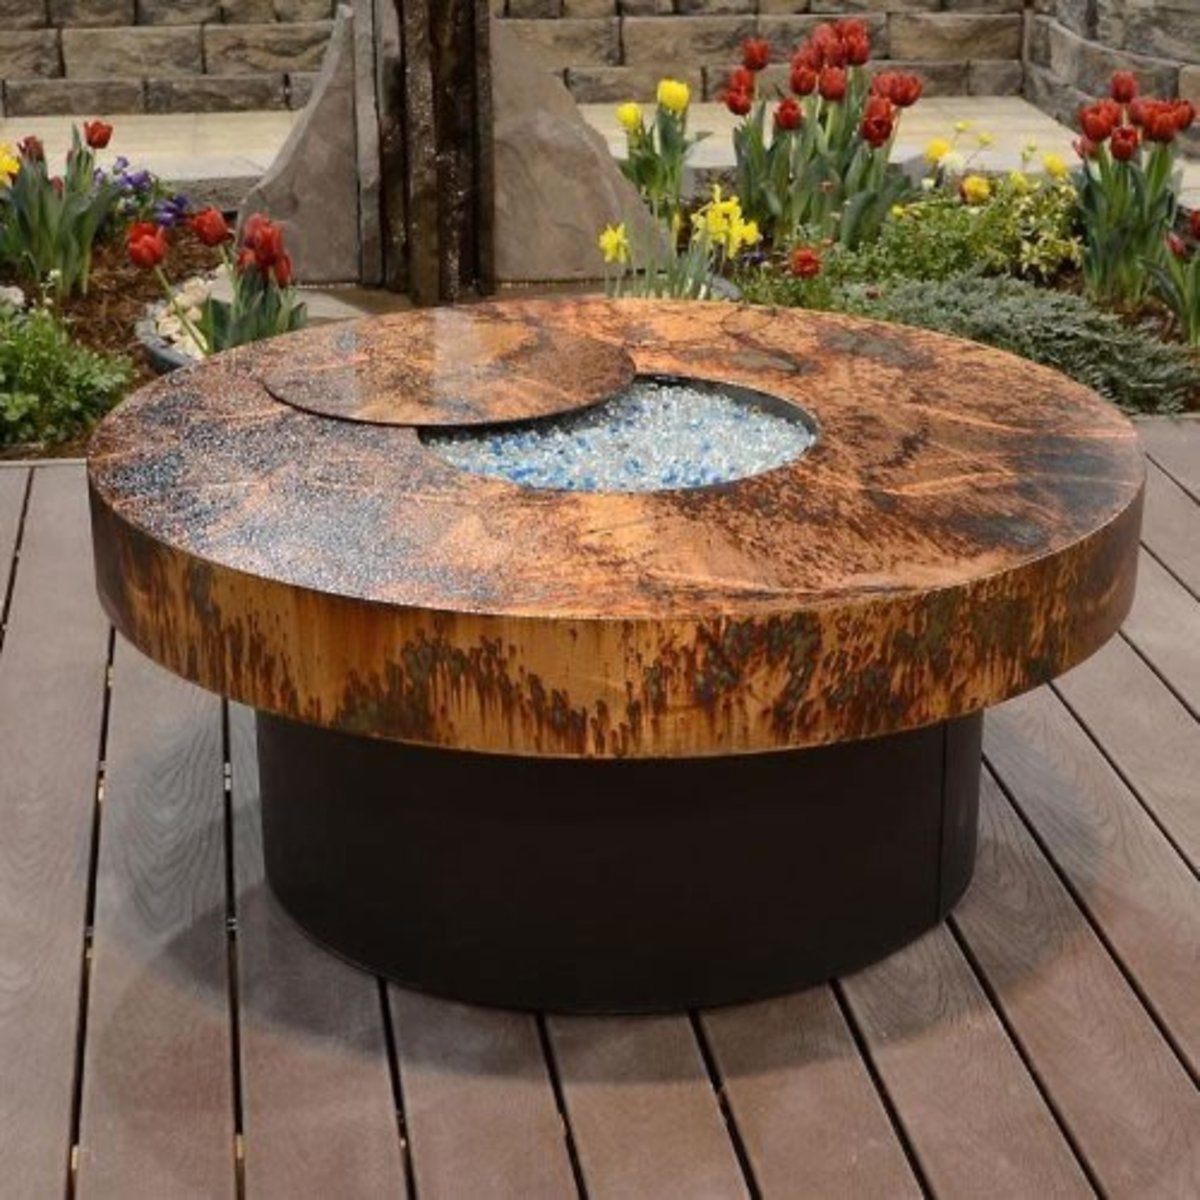 Circular chat table with matching fire pit cover